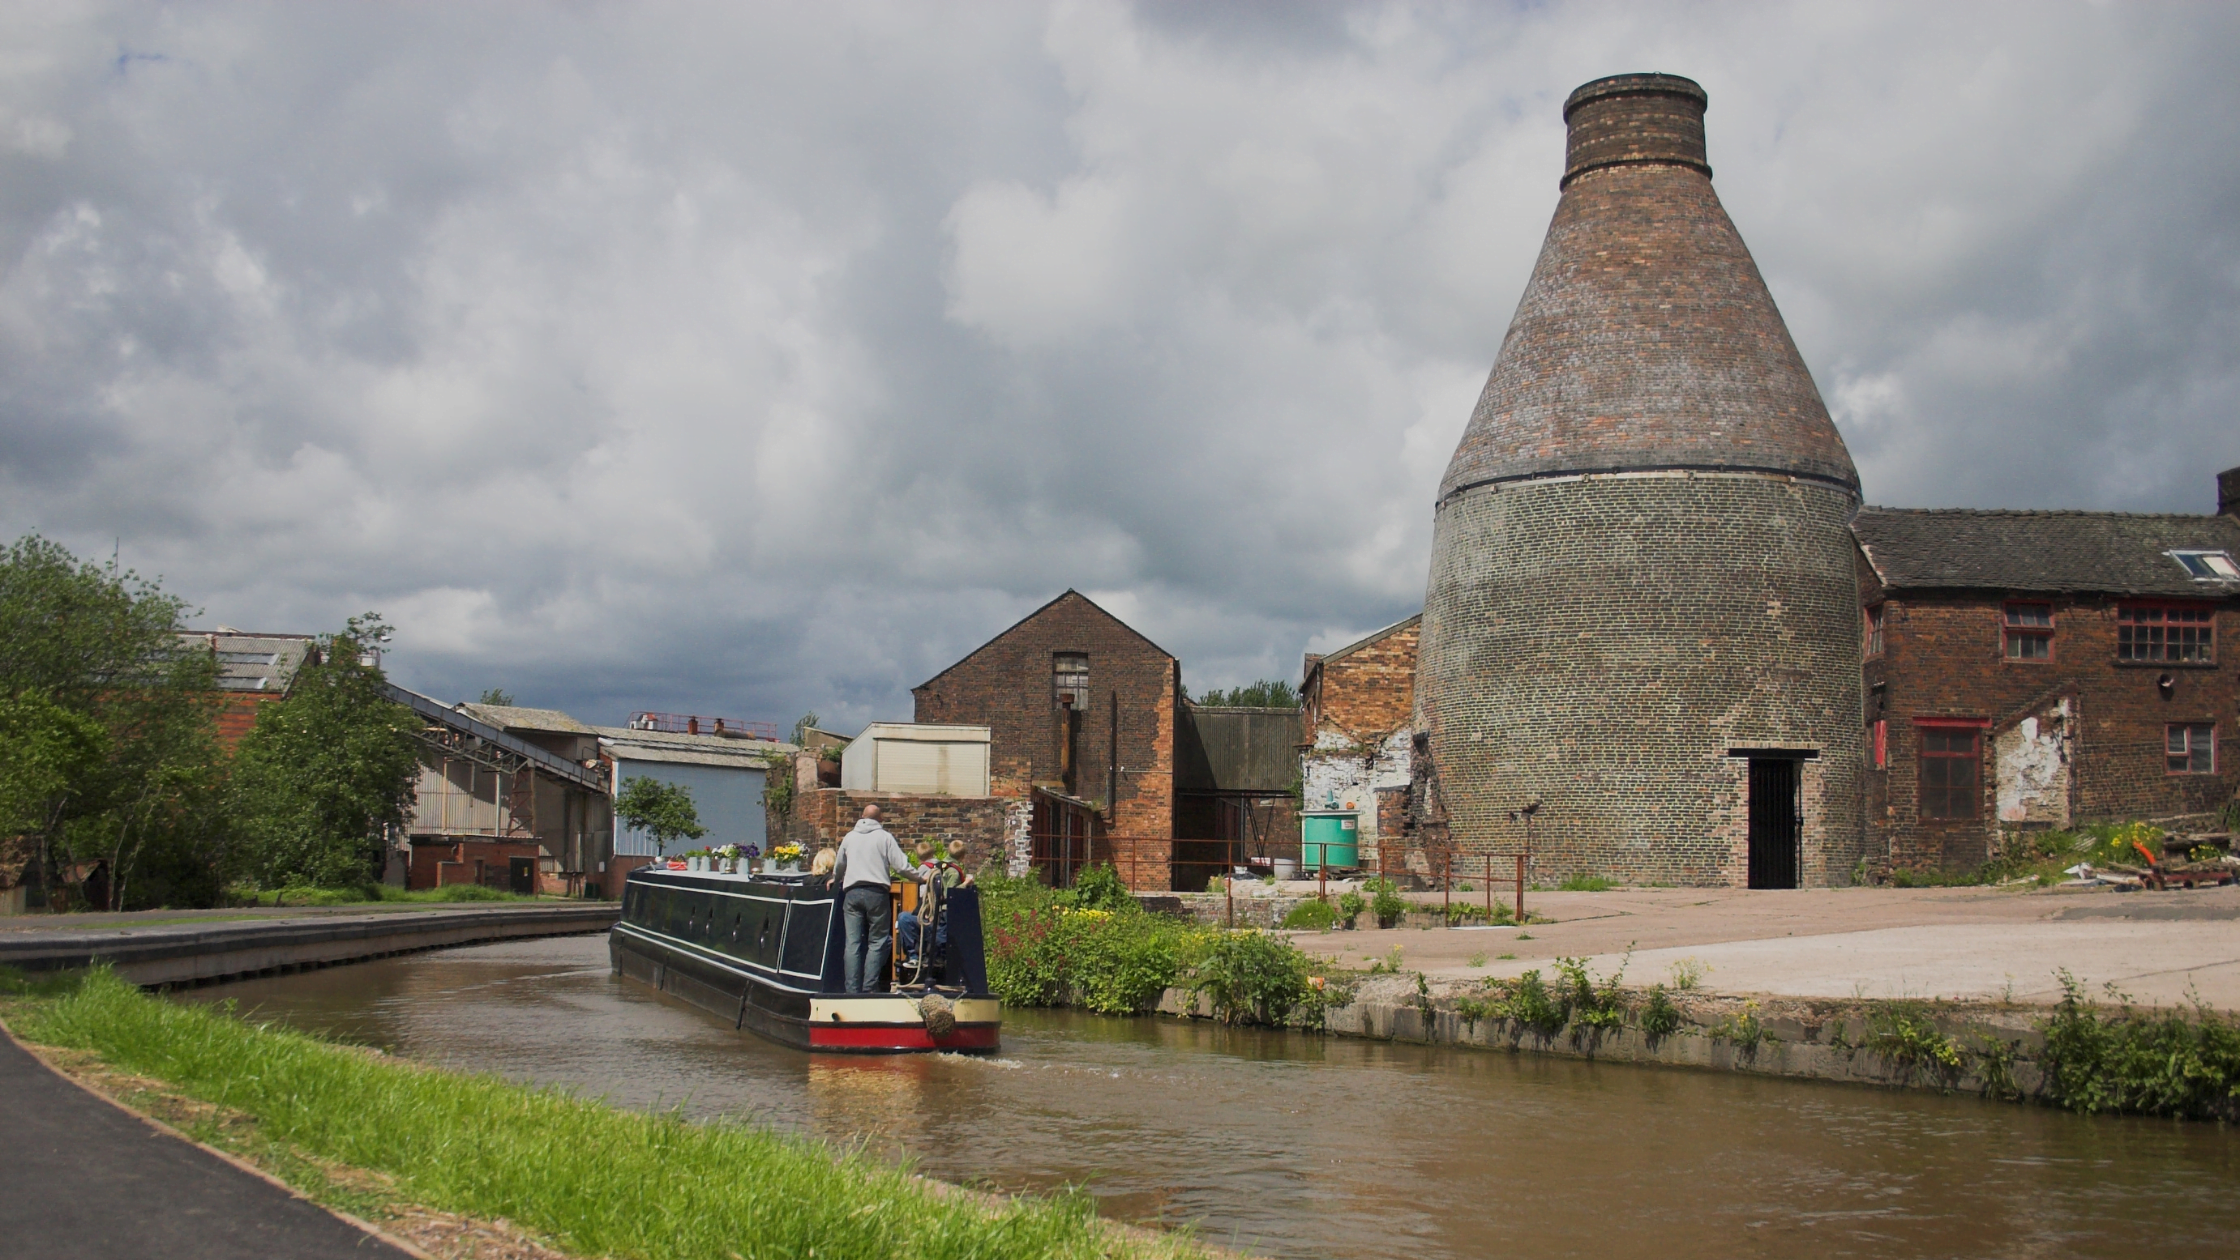 Stoke on Trent canal and bottle kiln